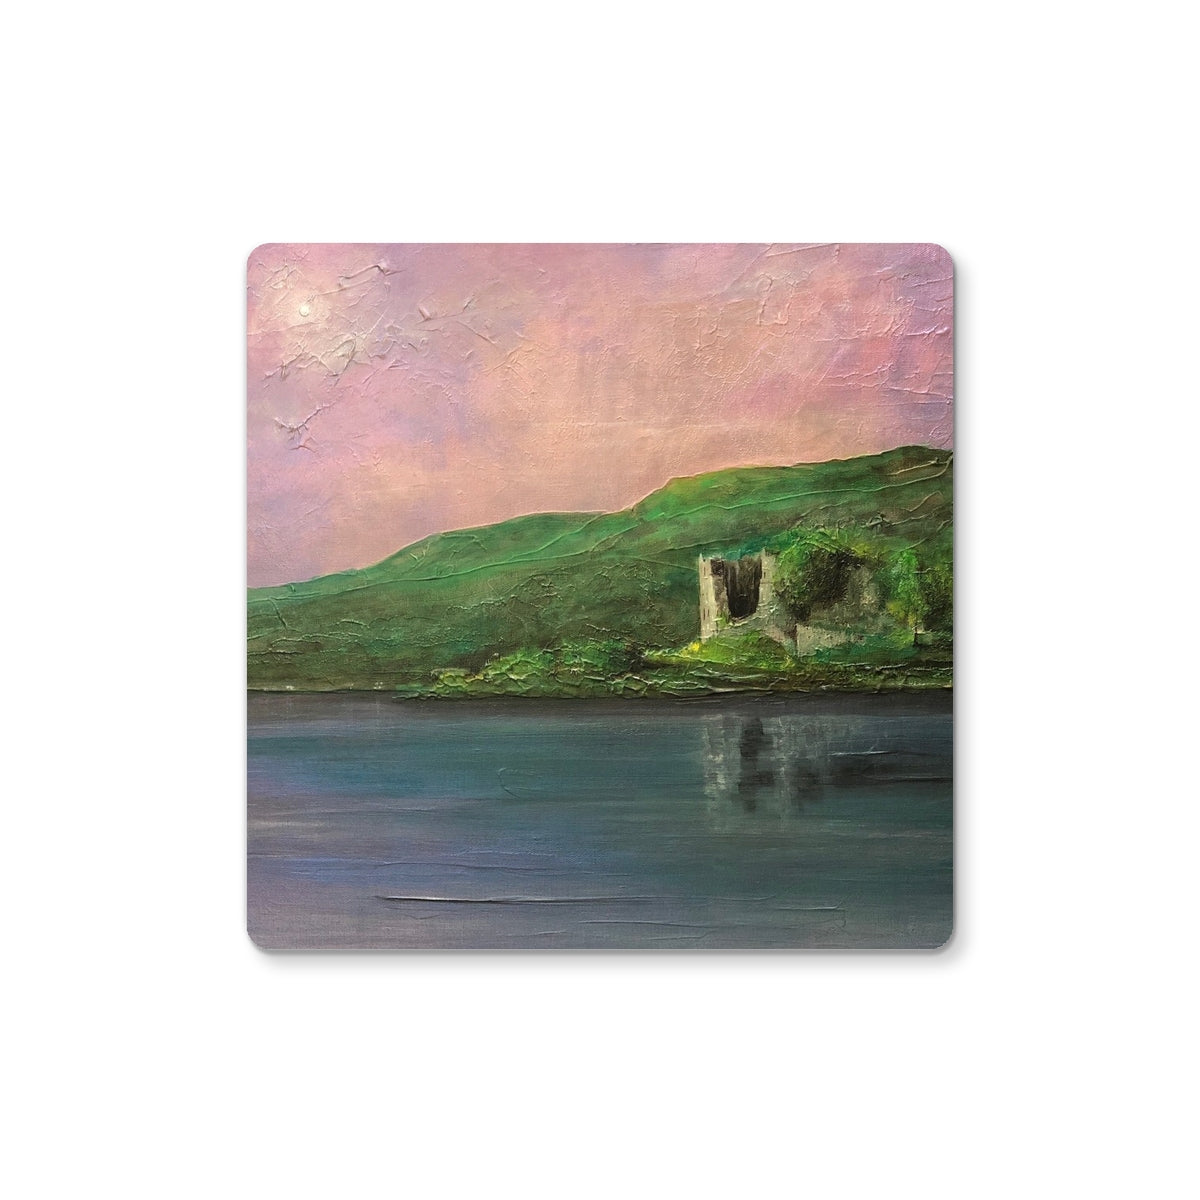 Old Castle Lachlan Art Gifts Coaster-Coasters-Historic & Iconic Scotland Art Gallery-Single Coaster-Paintings, Prints, Homeware, Art Gifts From Scotland By Scottish Artist Kevin Hunter